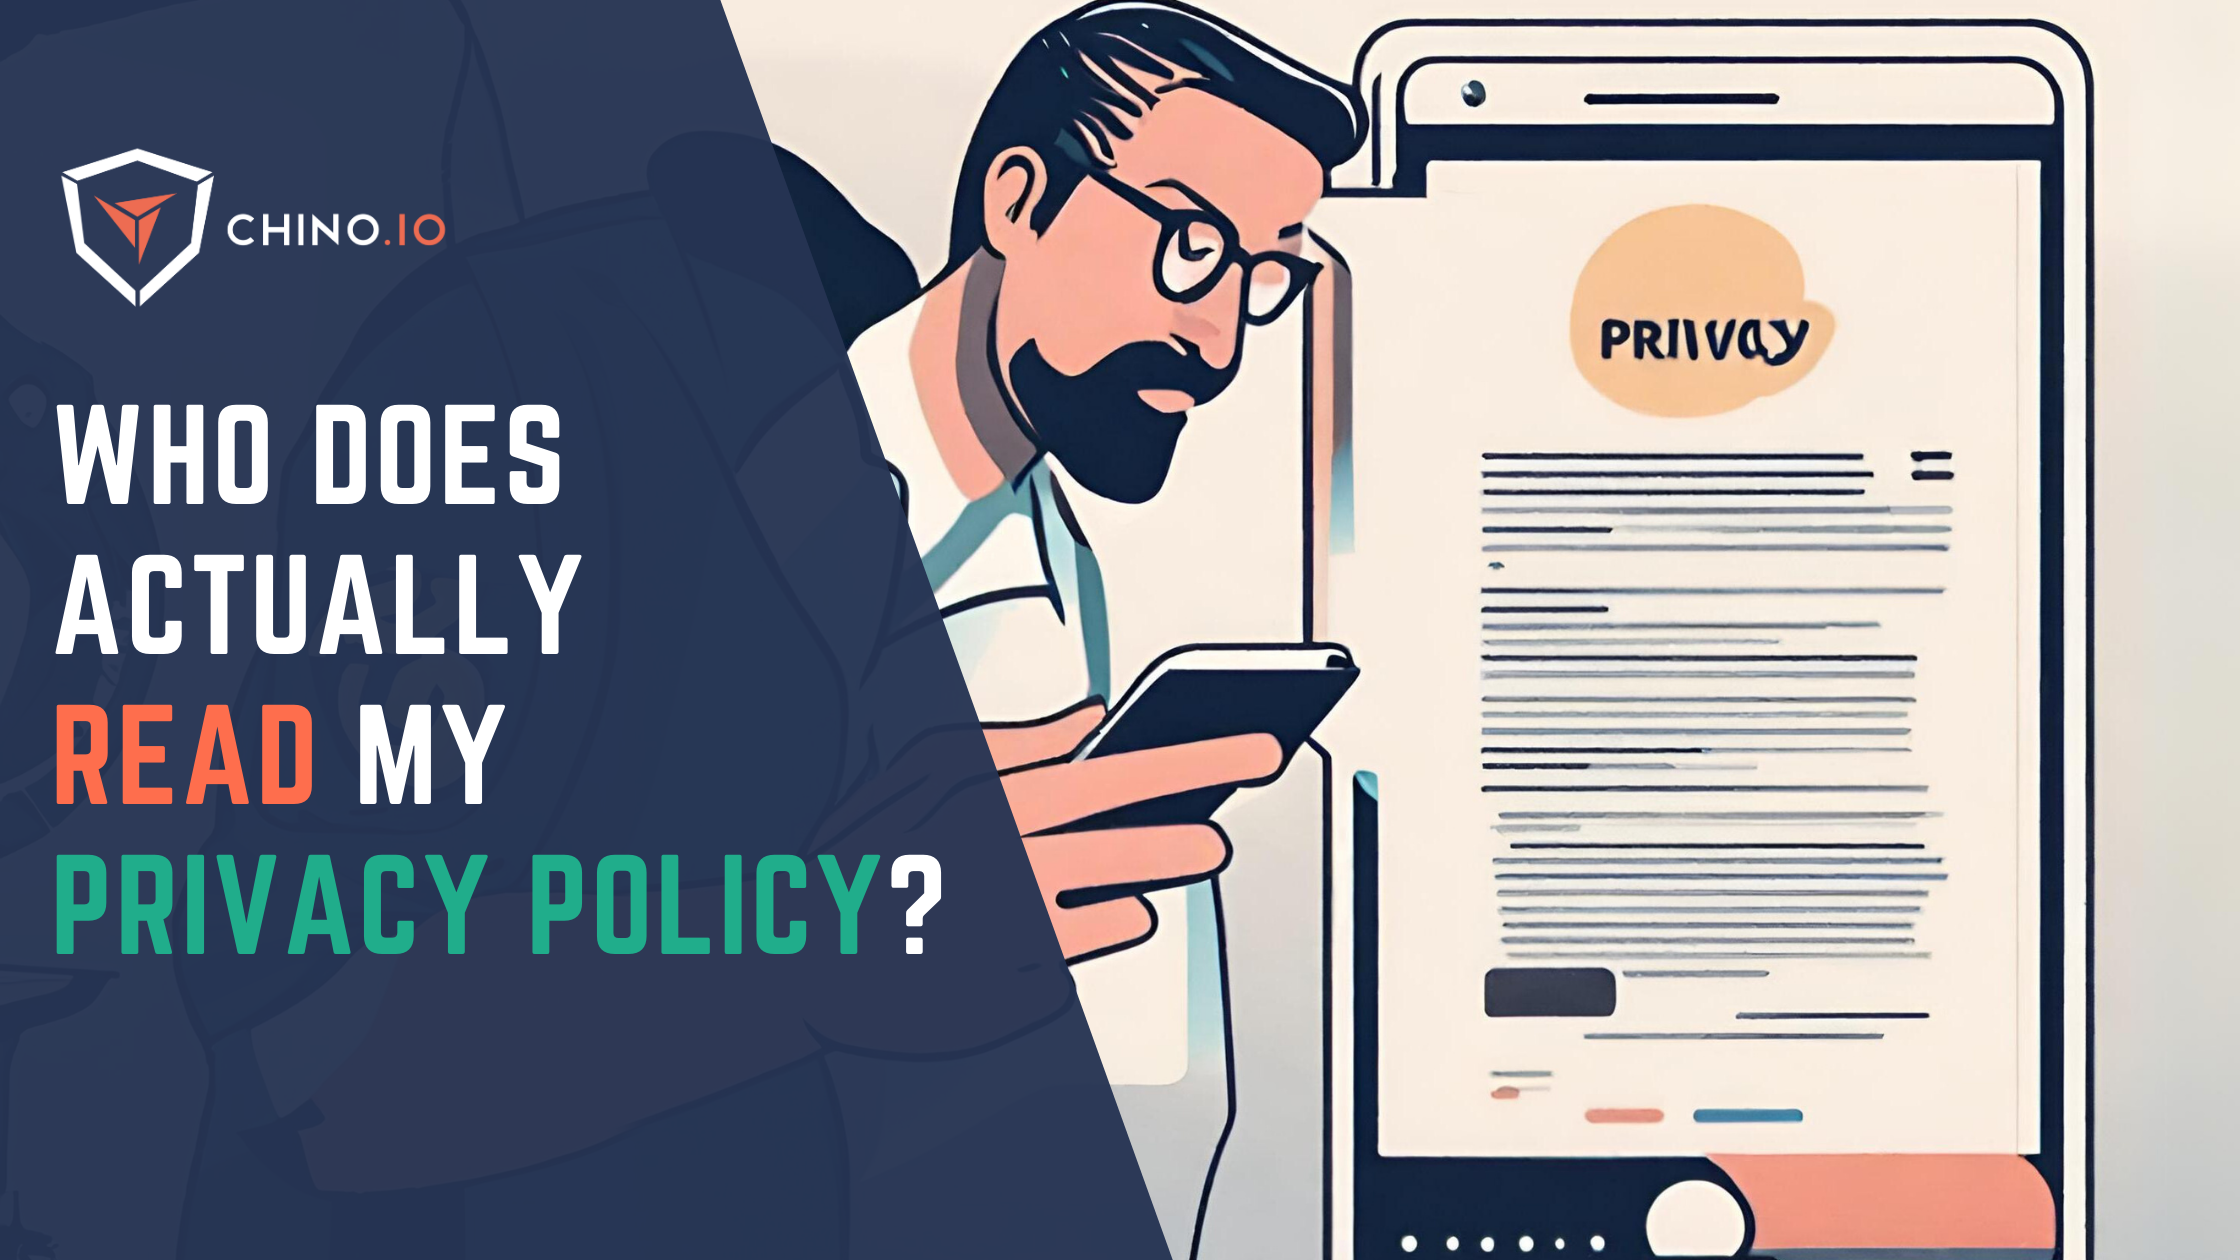 Who does actually read my privacy policy?